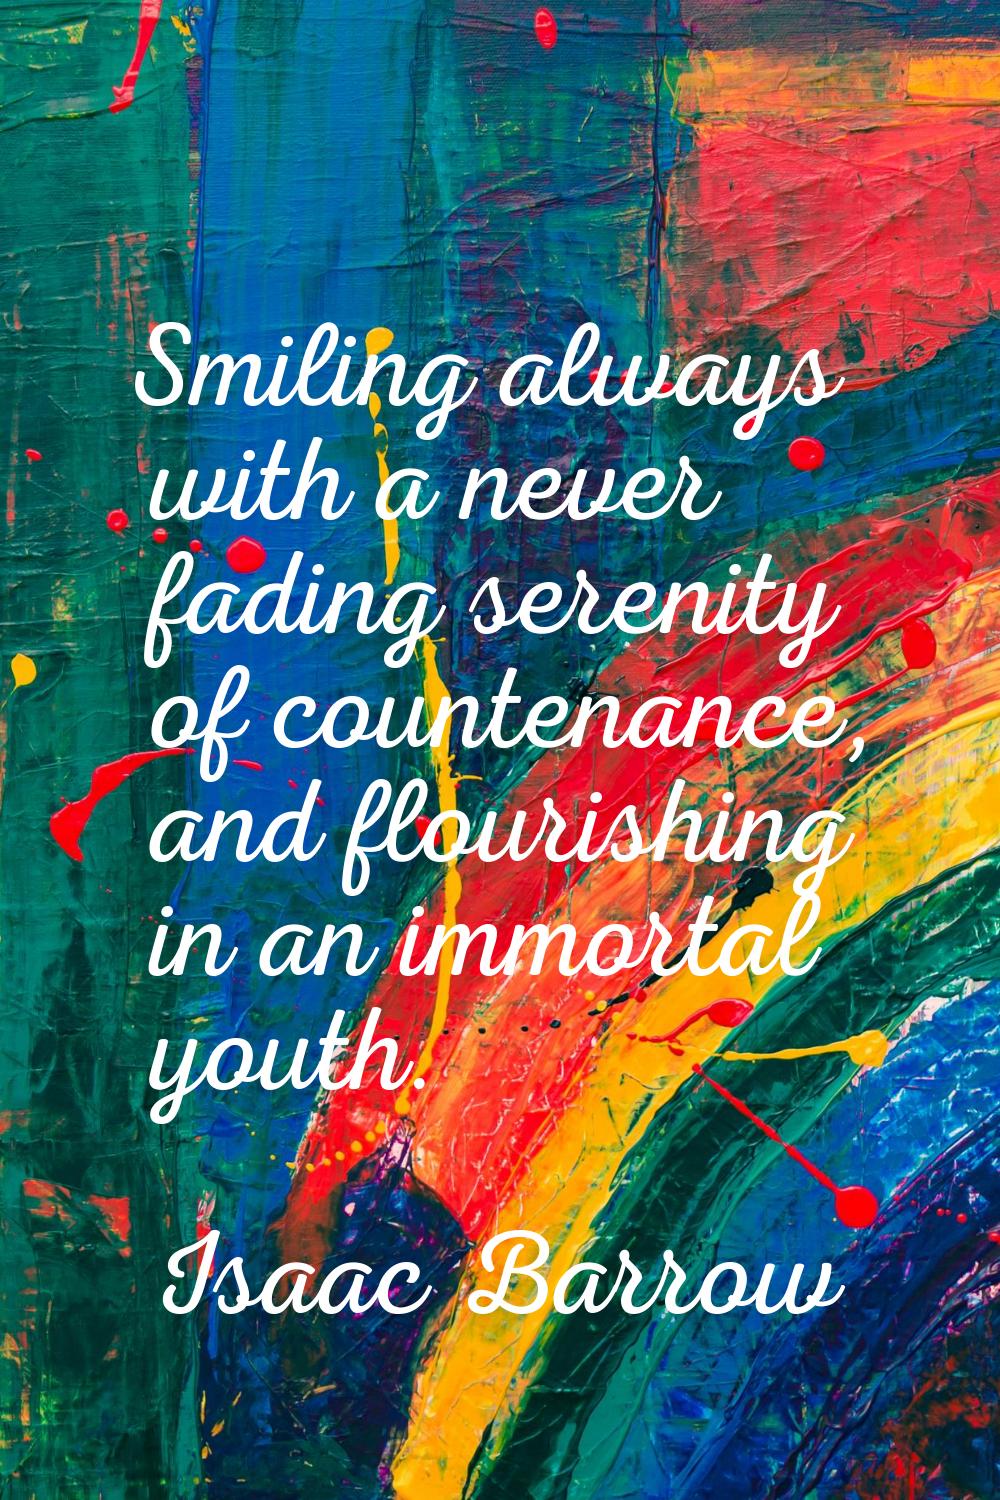 Smiling always with a never fading serenity of countenance, and flourishing in an immortal youth.